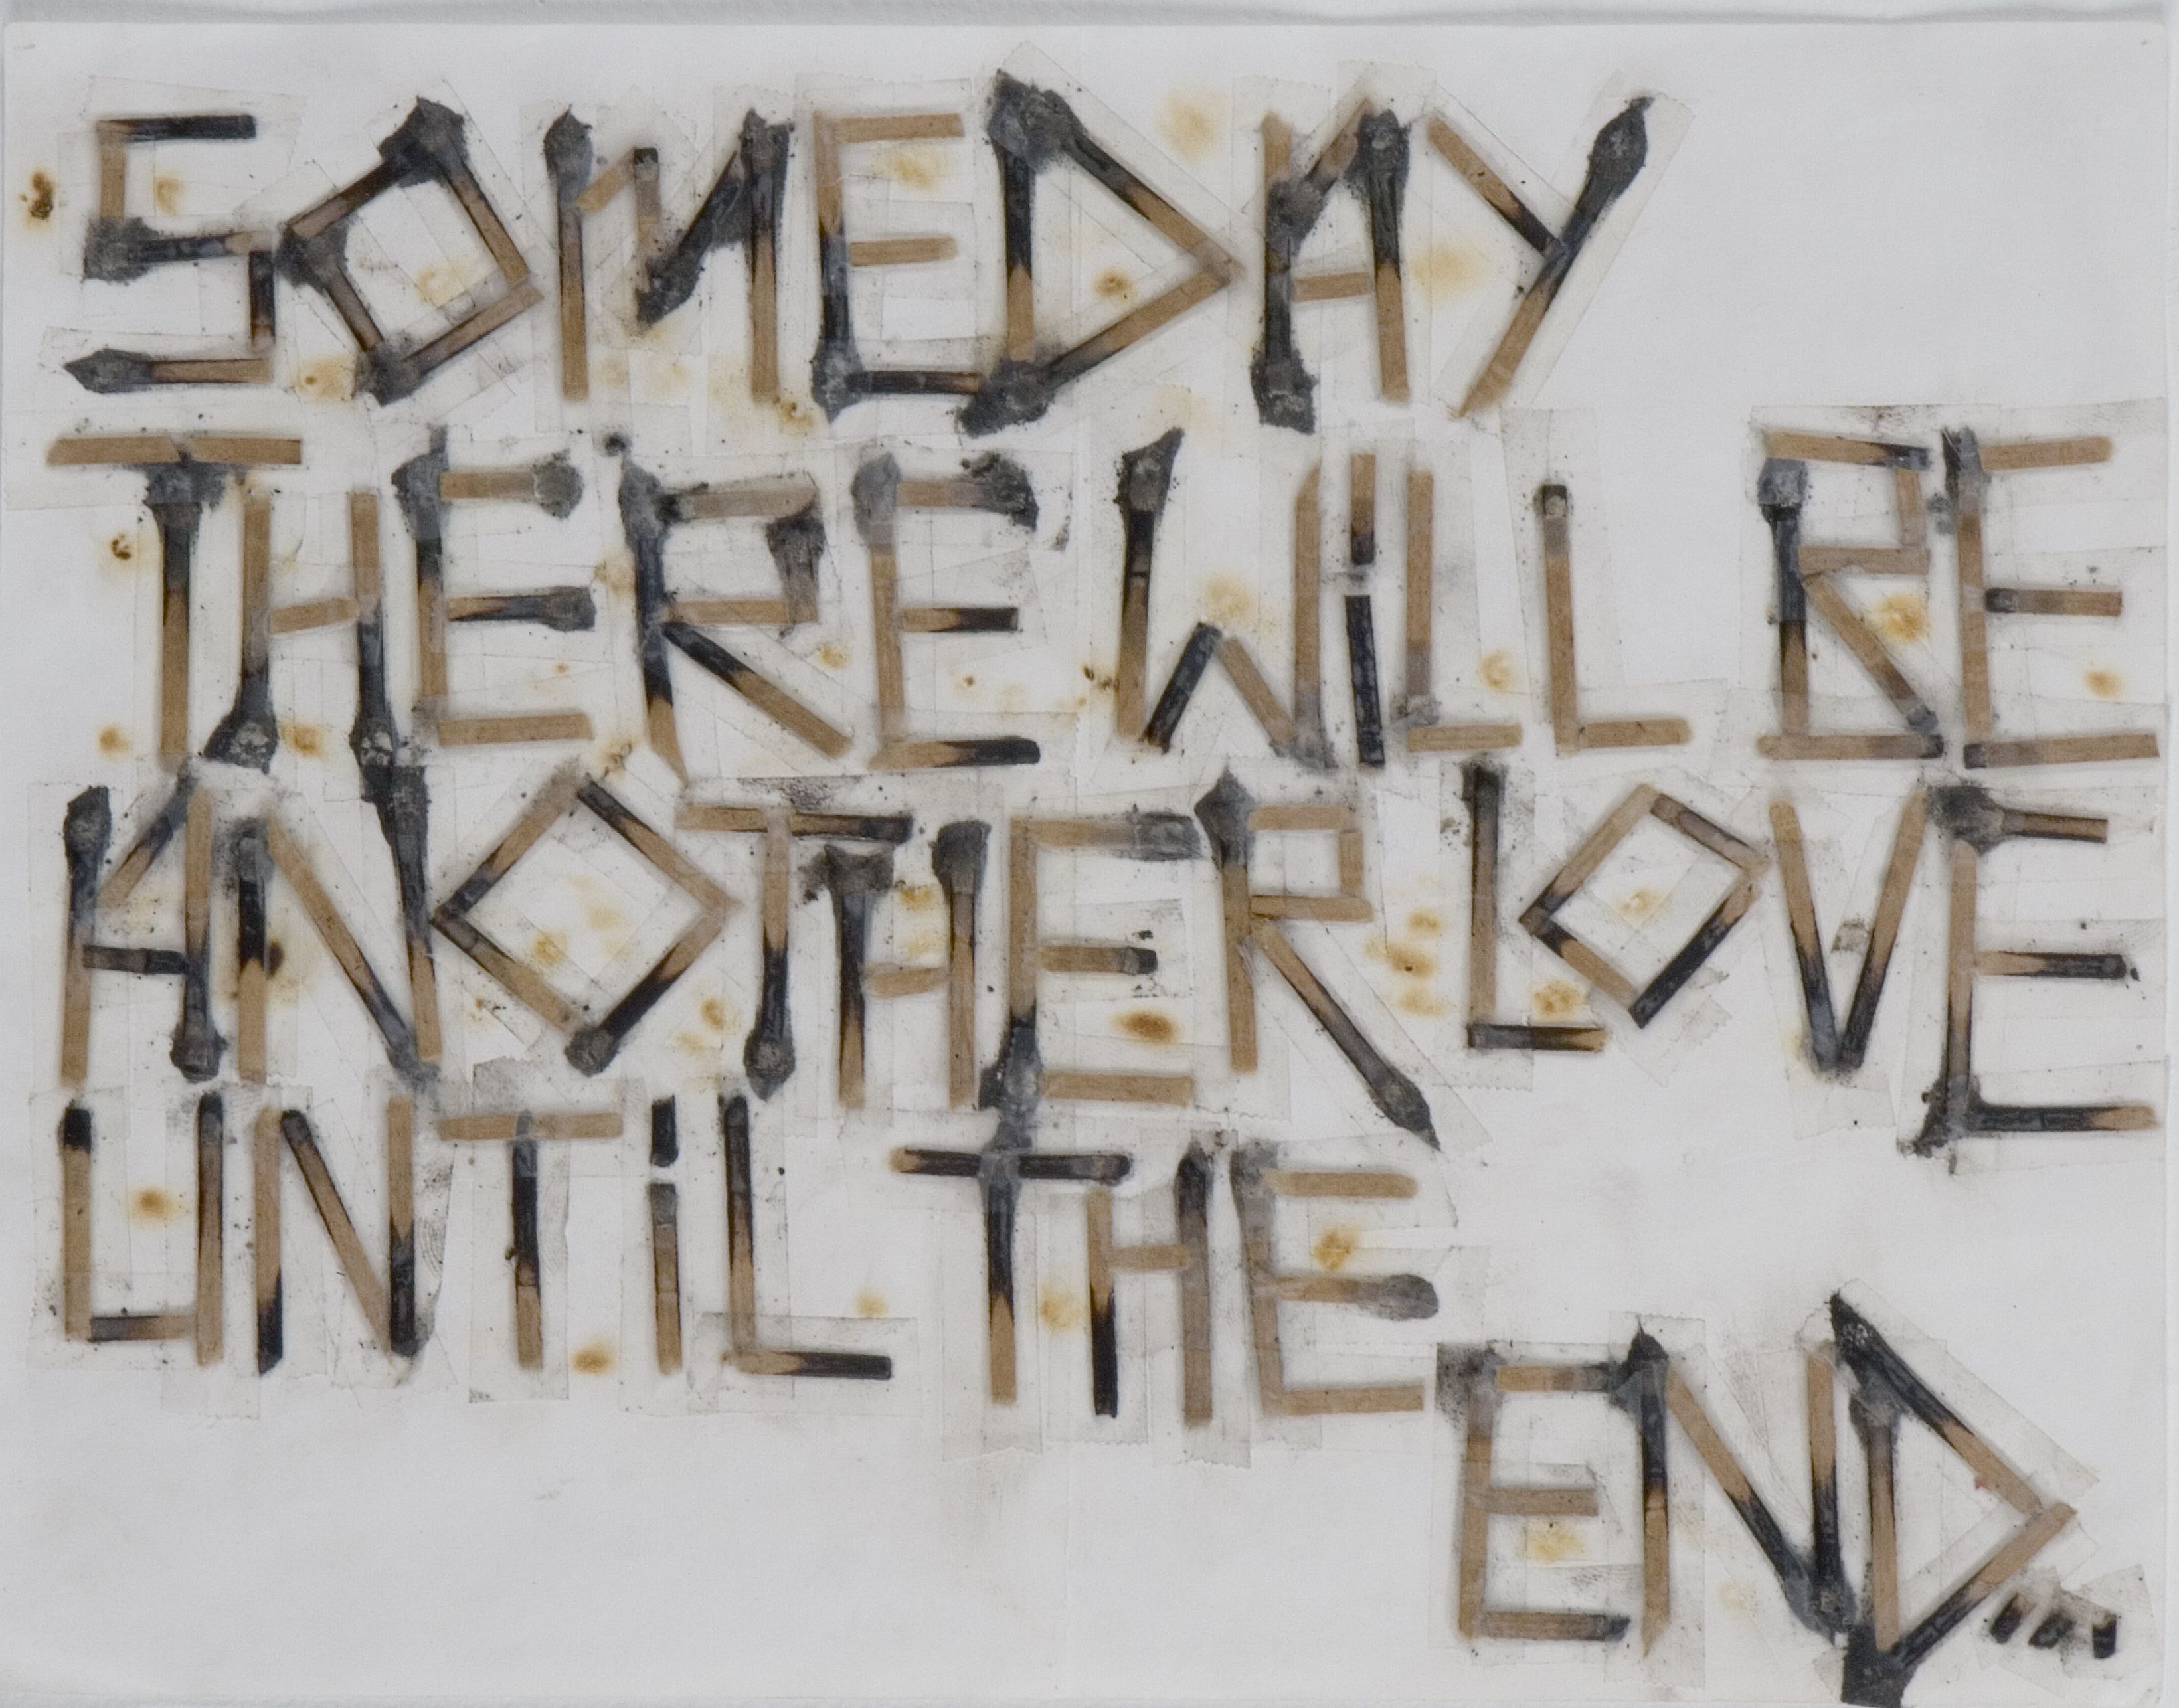 Untitled (Someday There Will Be Another Love Until the End...),2006-07